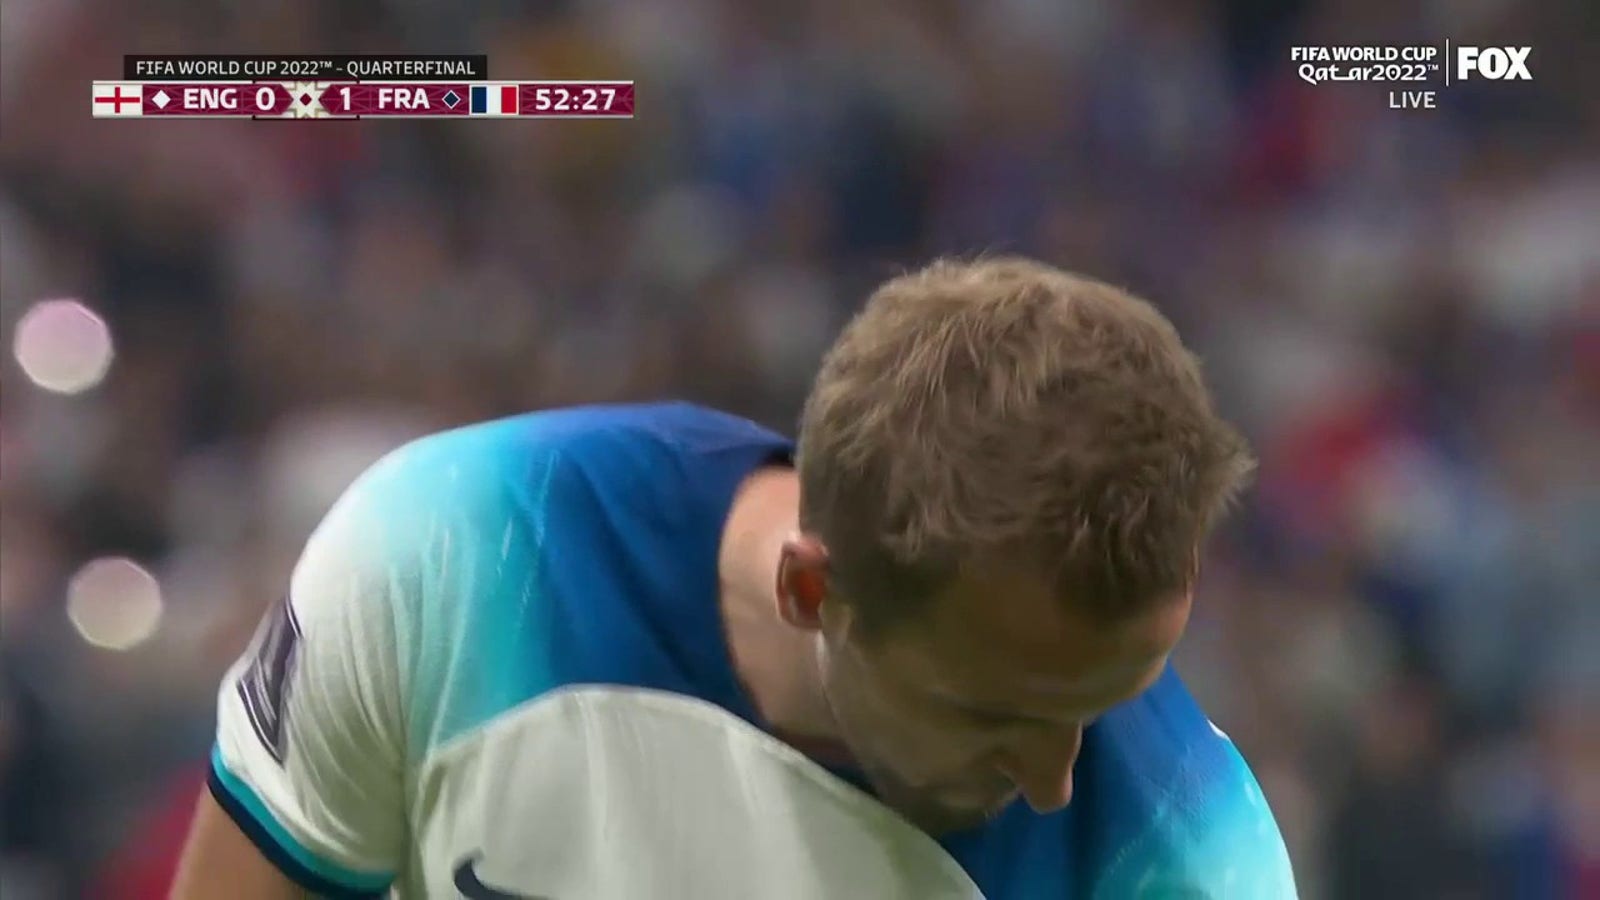 England's Harry Kane scored against France in the 52nd minute |  World Cup 2022